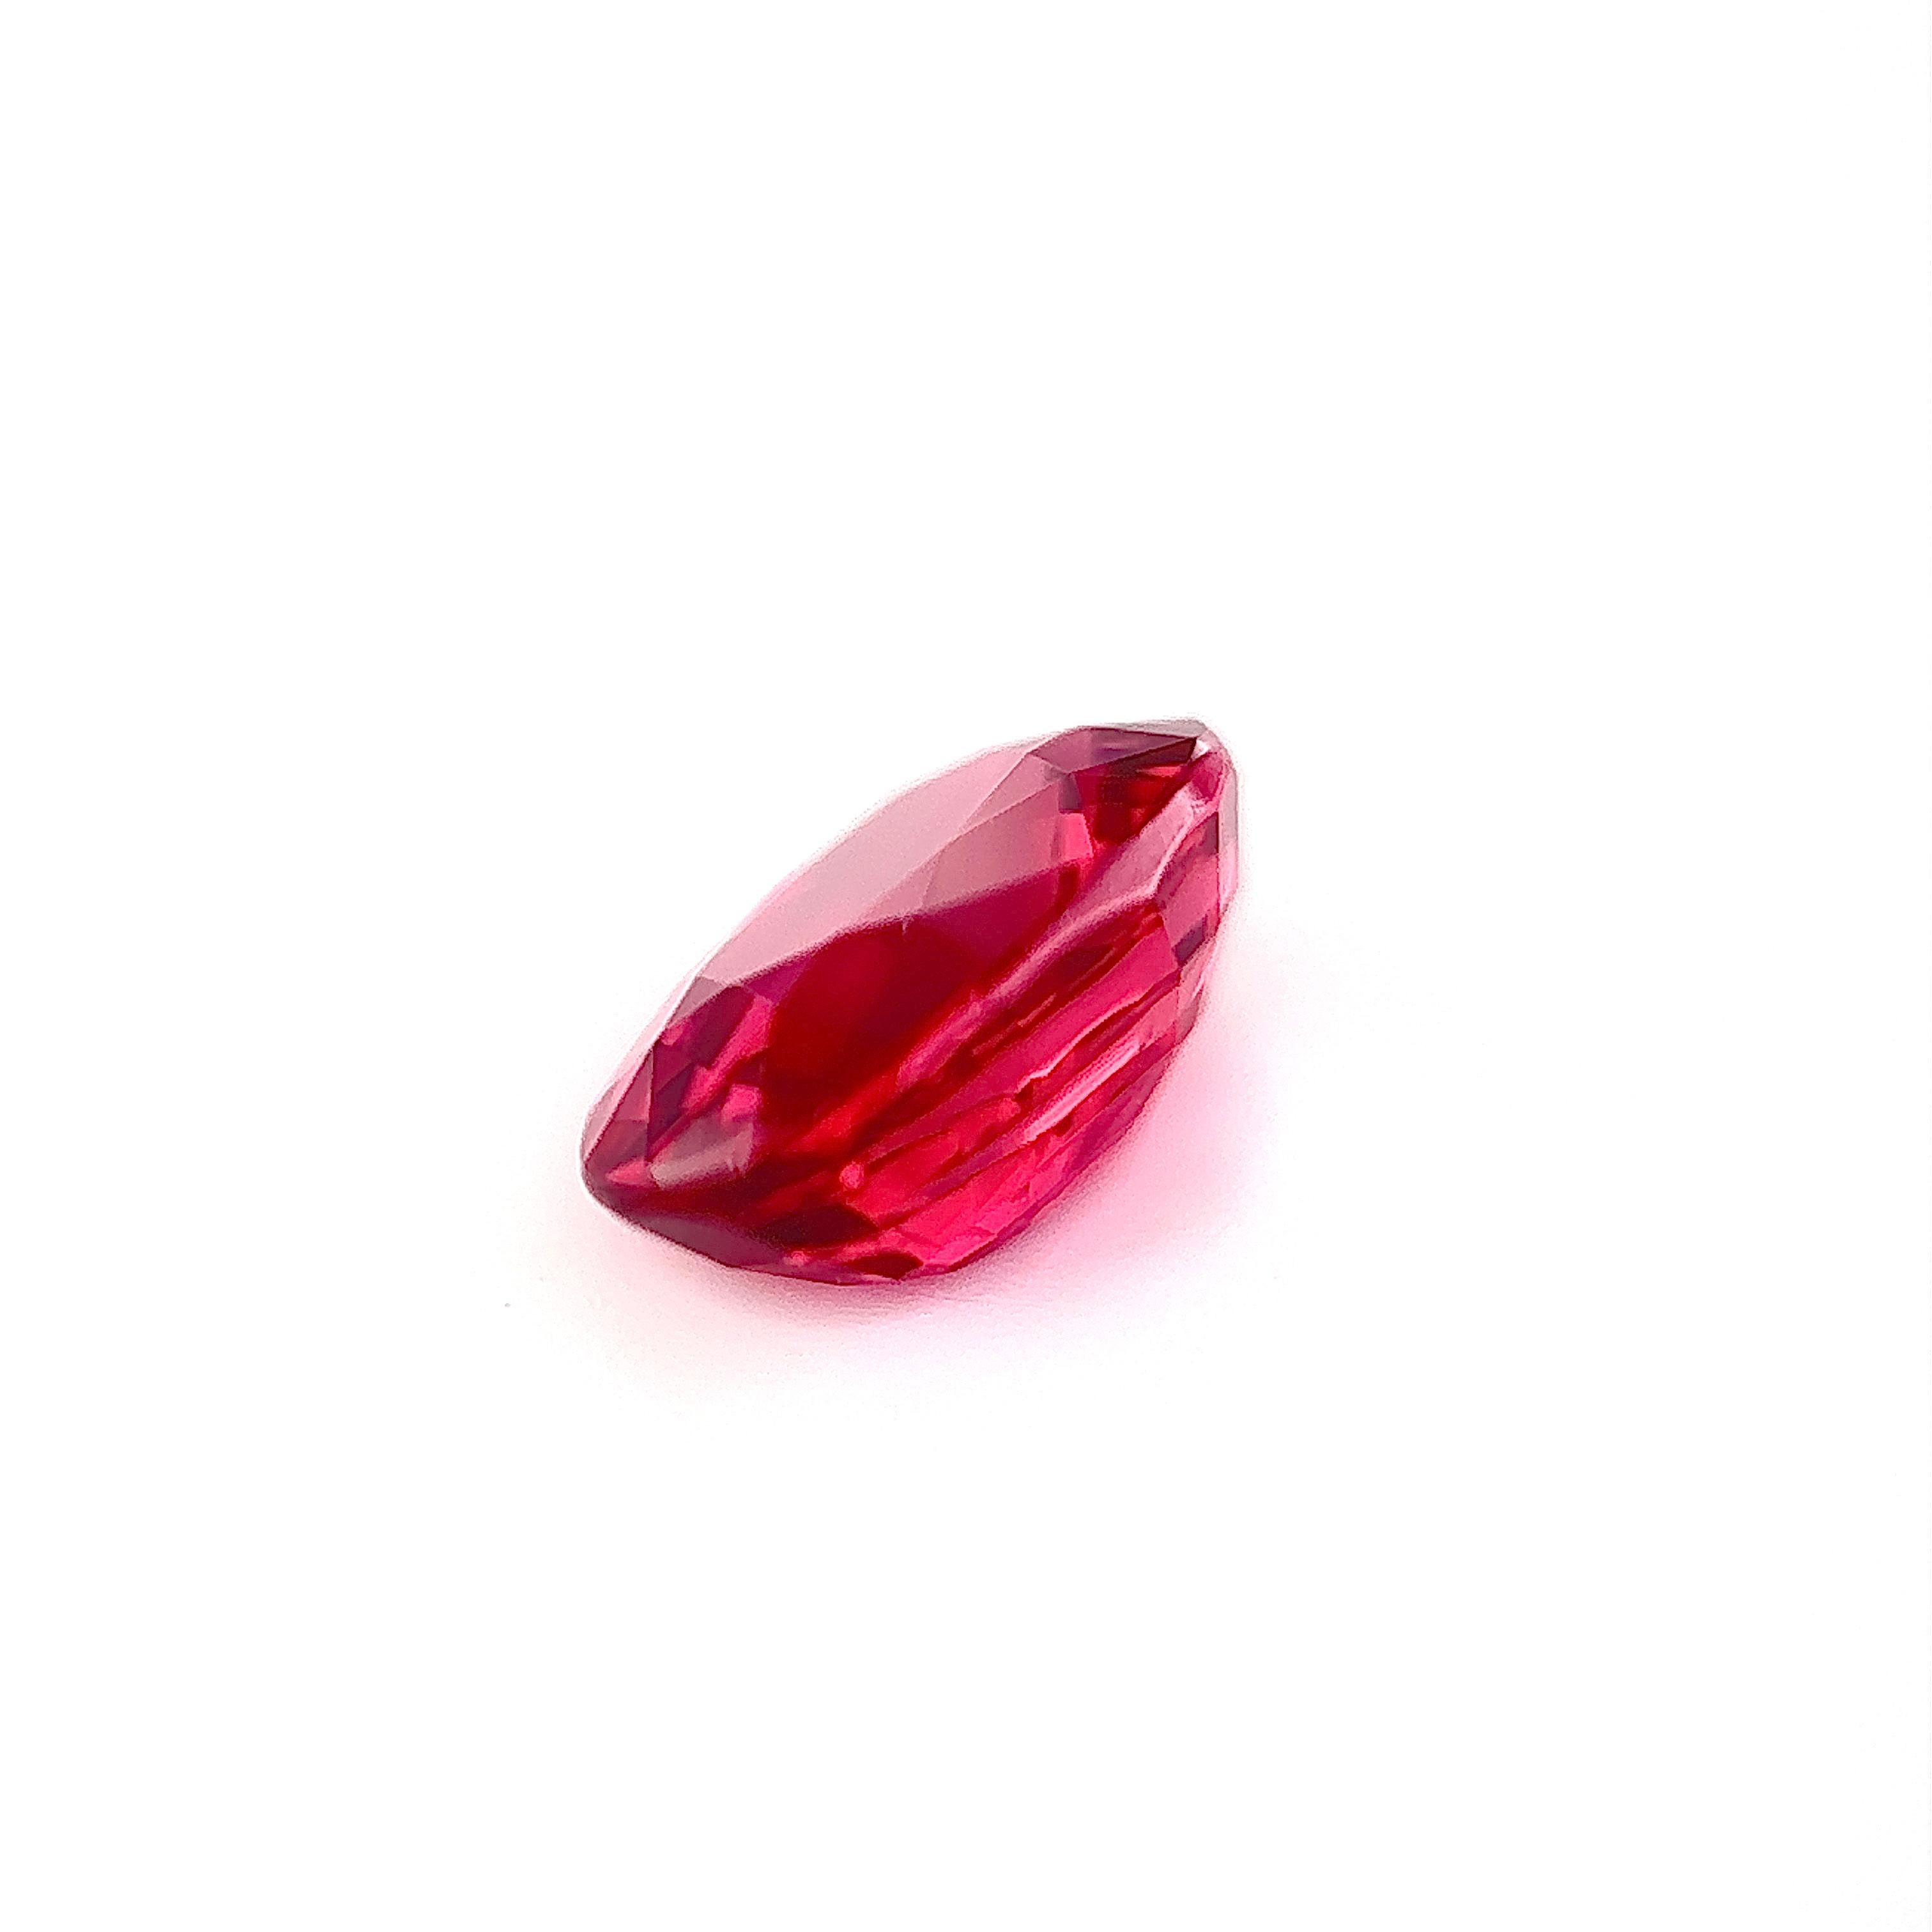 Cushion Cut Unheated 2.06 Carat Natural Ruby Loose stone in Pigeon Blood  For Sale